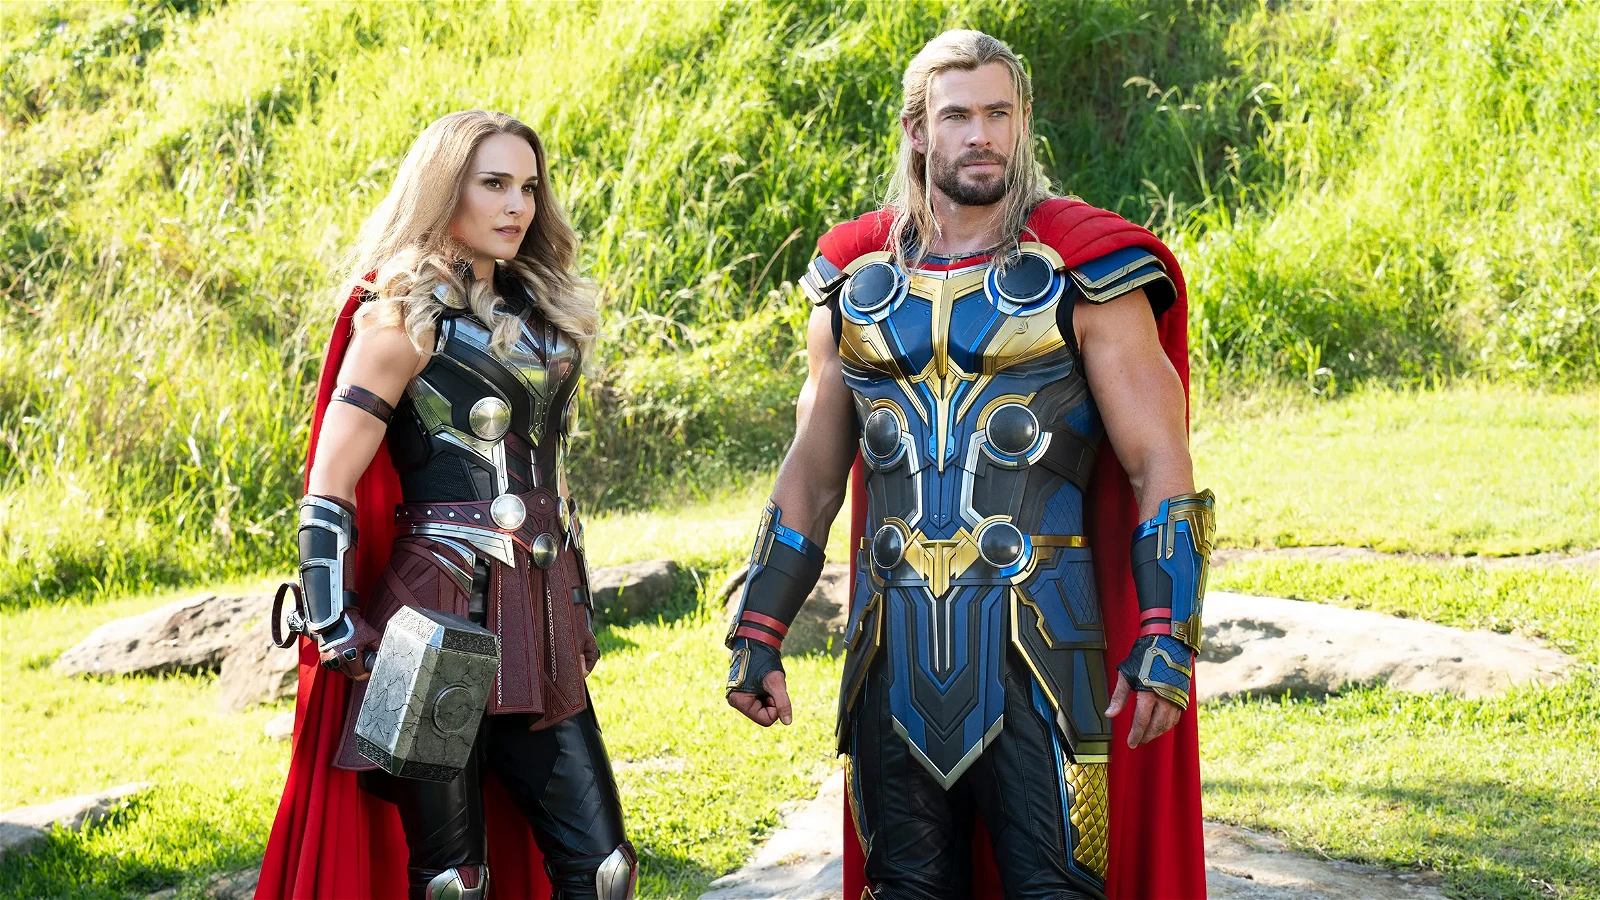 Thor: Love and Thunder (2022) became one of the most poorly received films in the MCU.